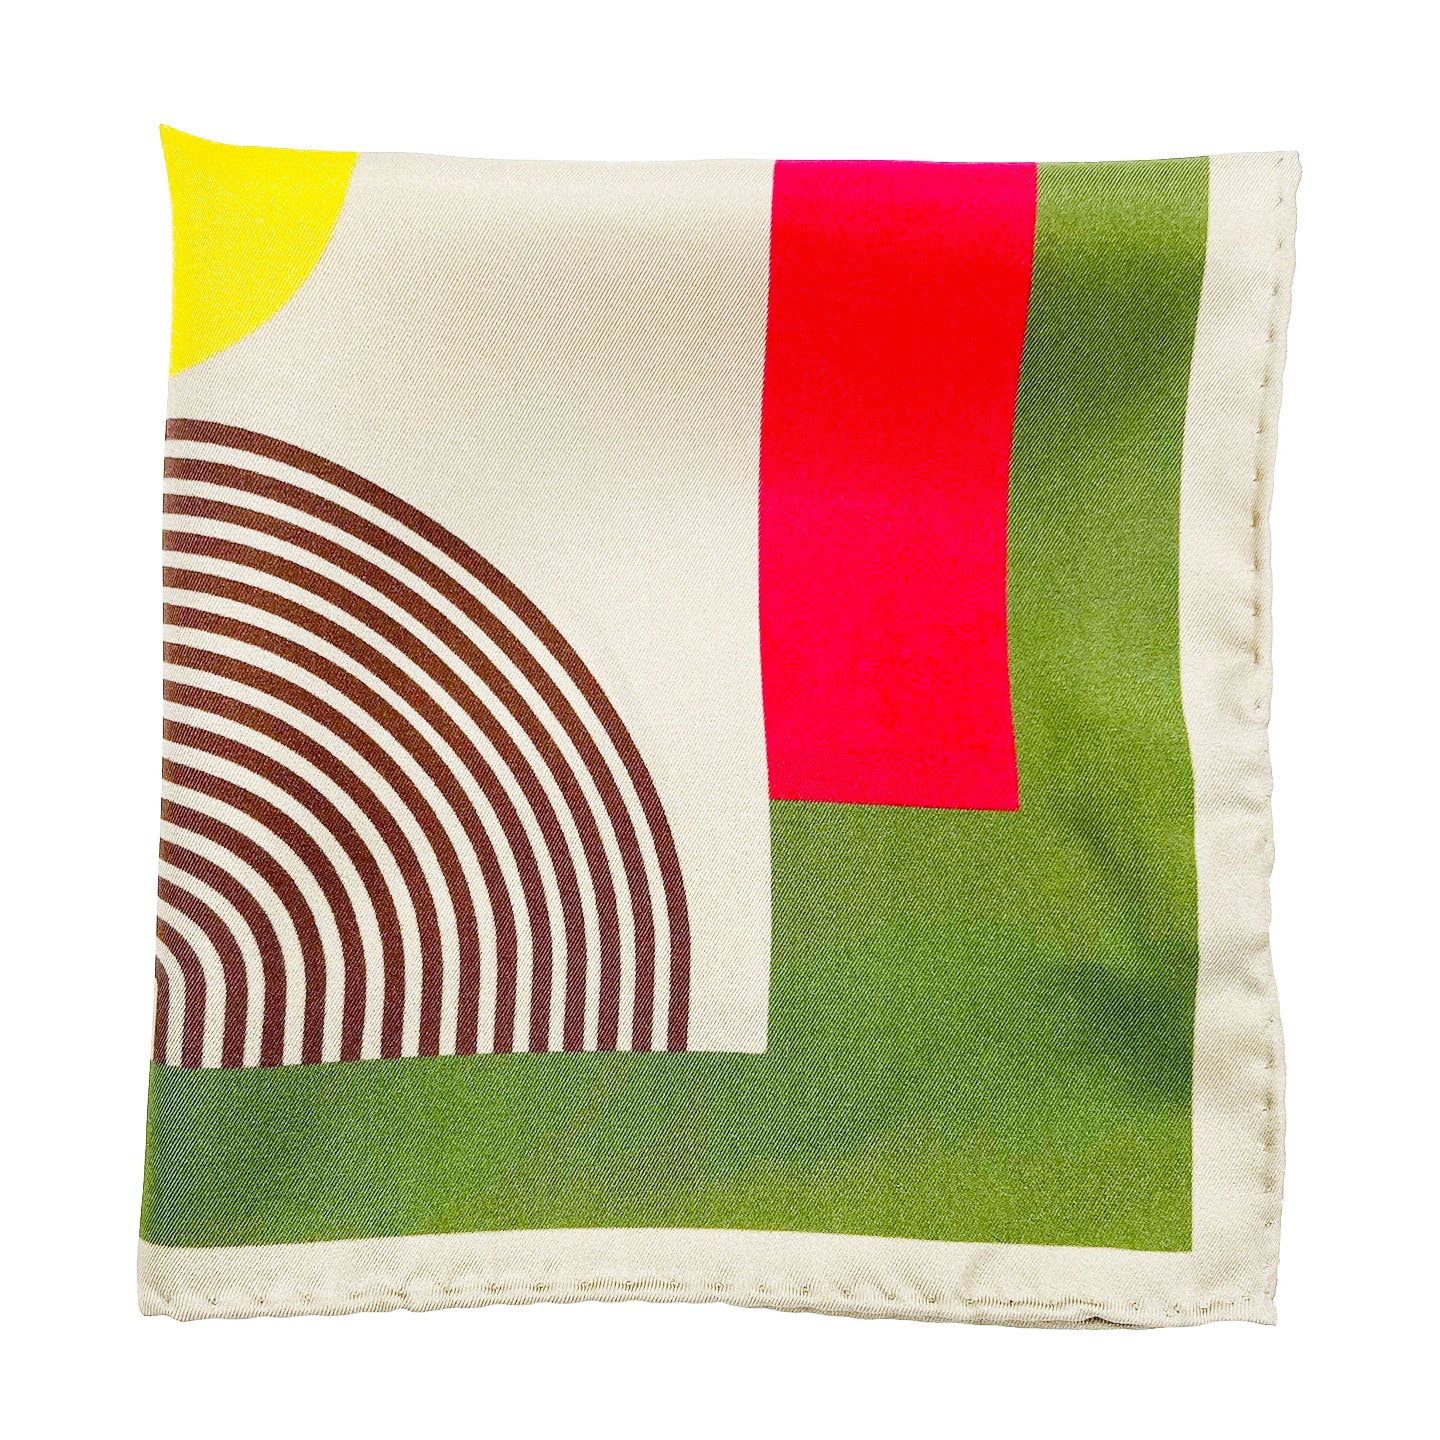 The 'Tay' silk pocket square from SOHO Scarves folded into a quarter, showing the retro geometric pattern and cream-coloured border.